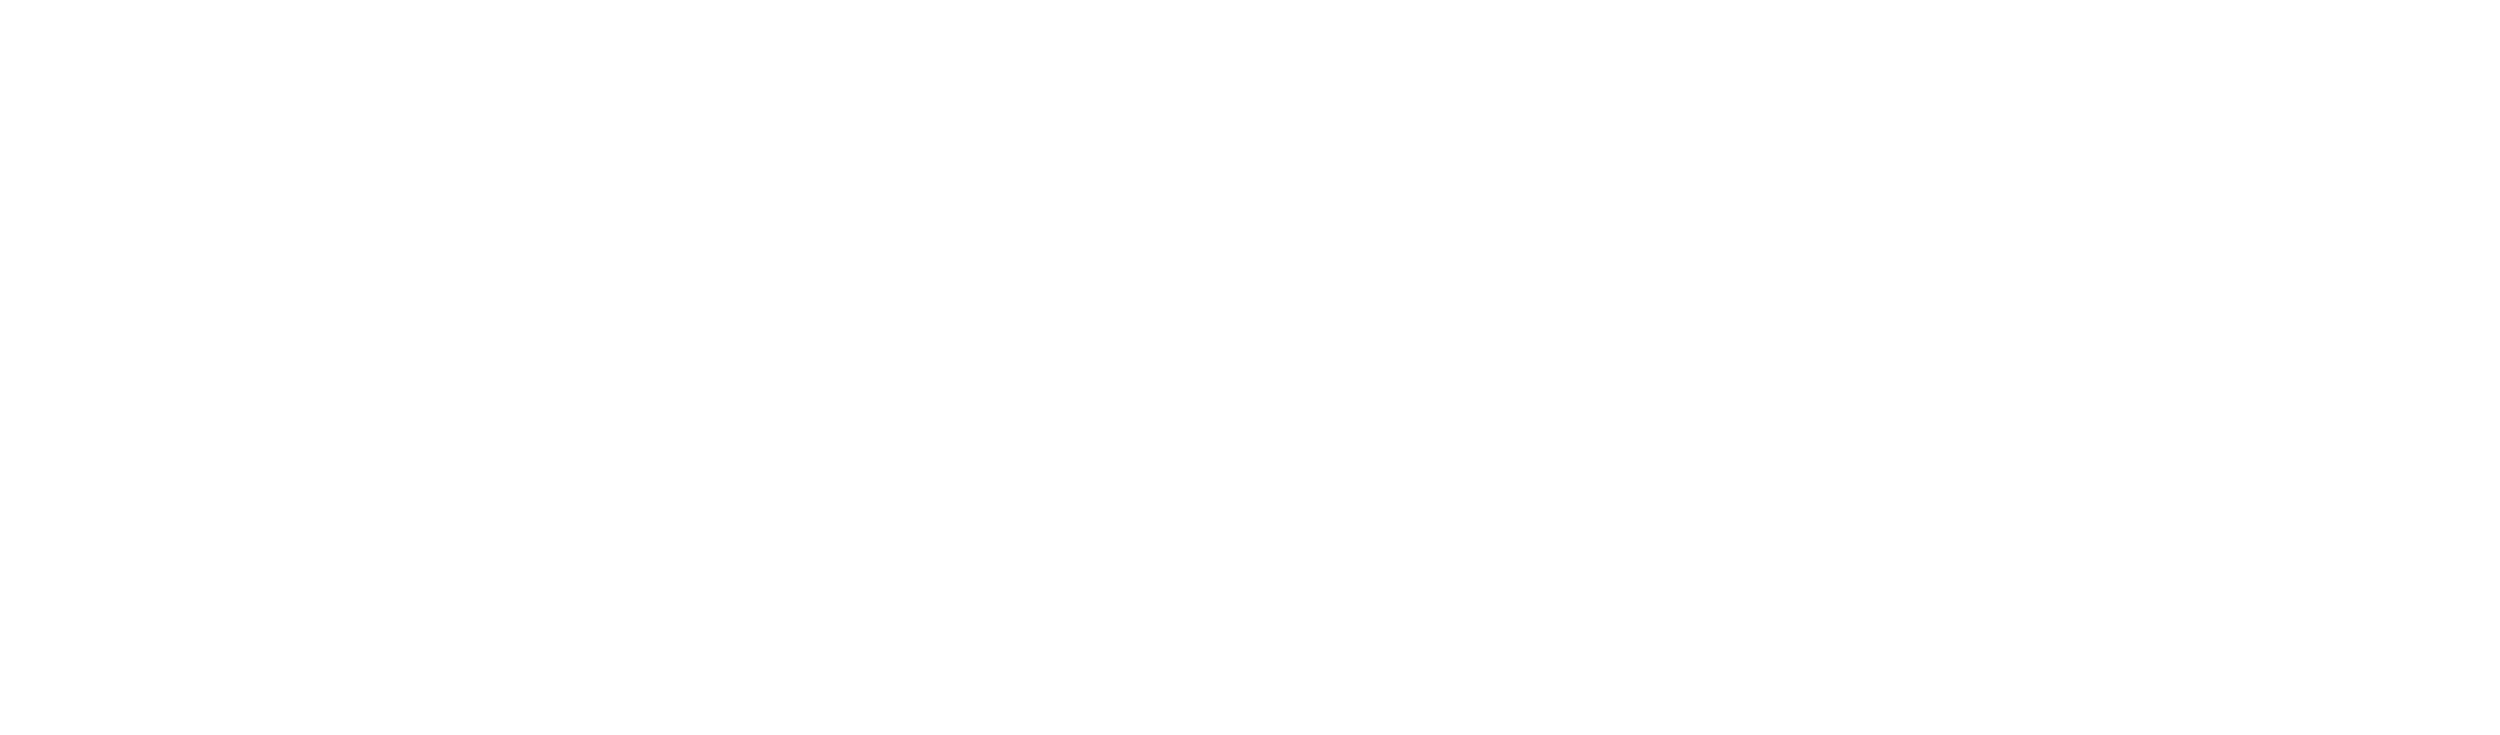 national-geographic-01.png